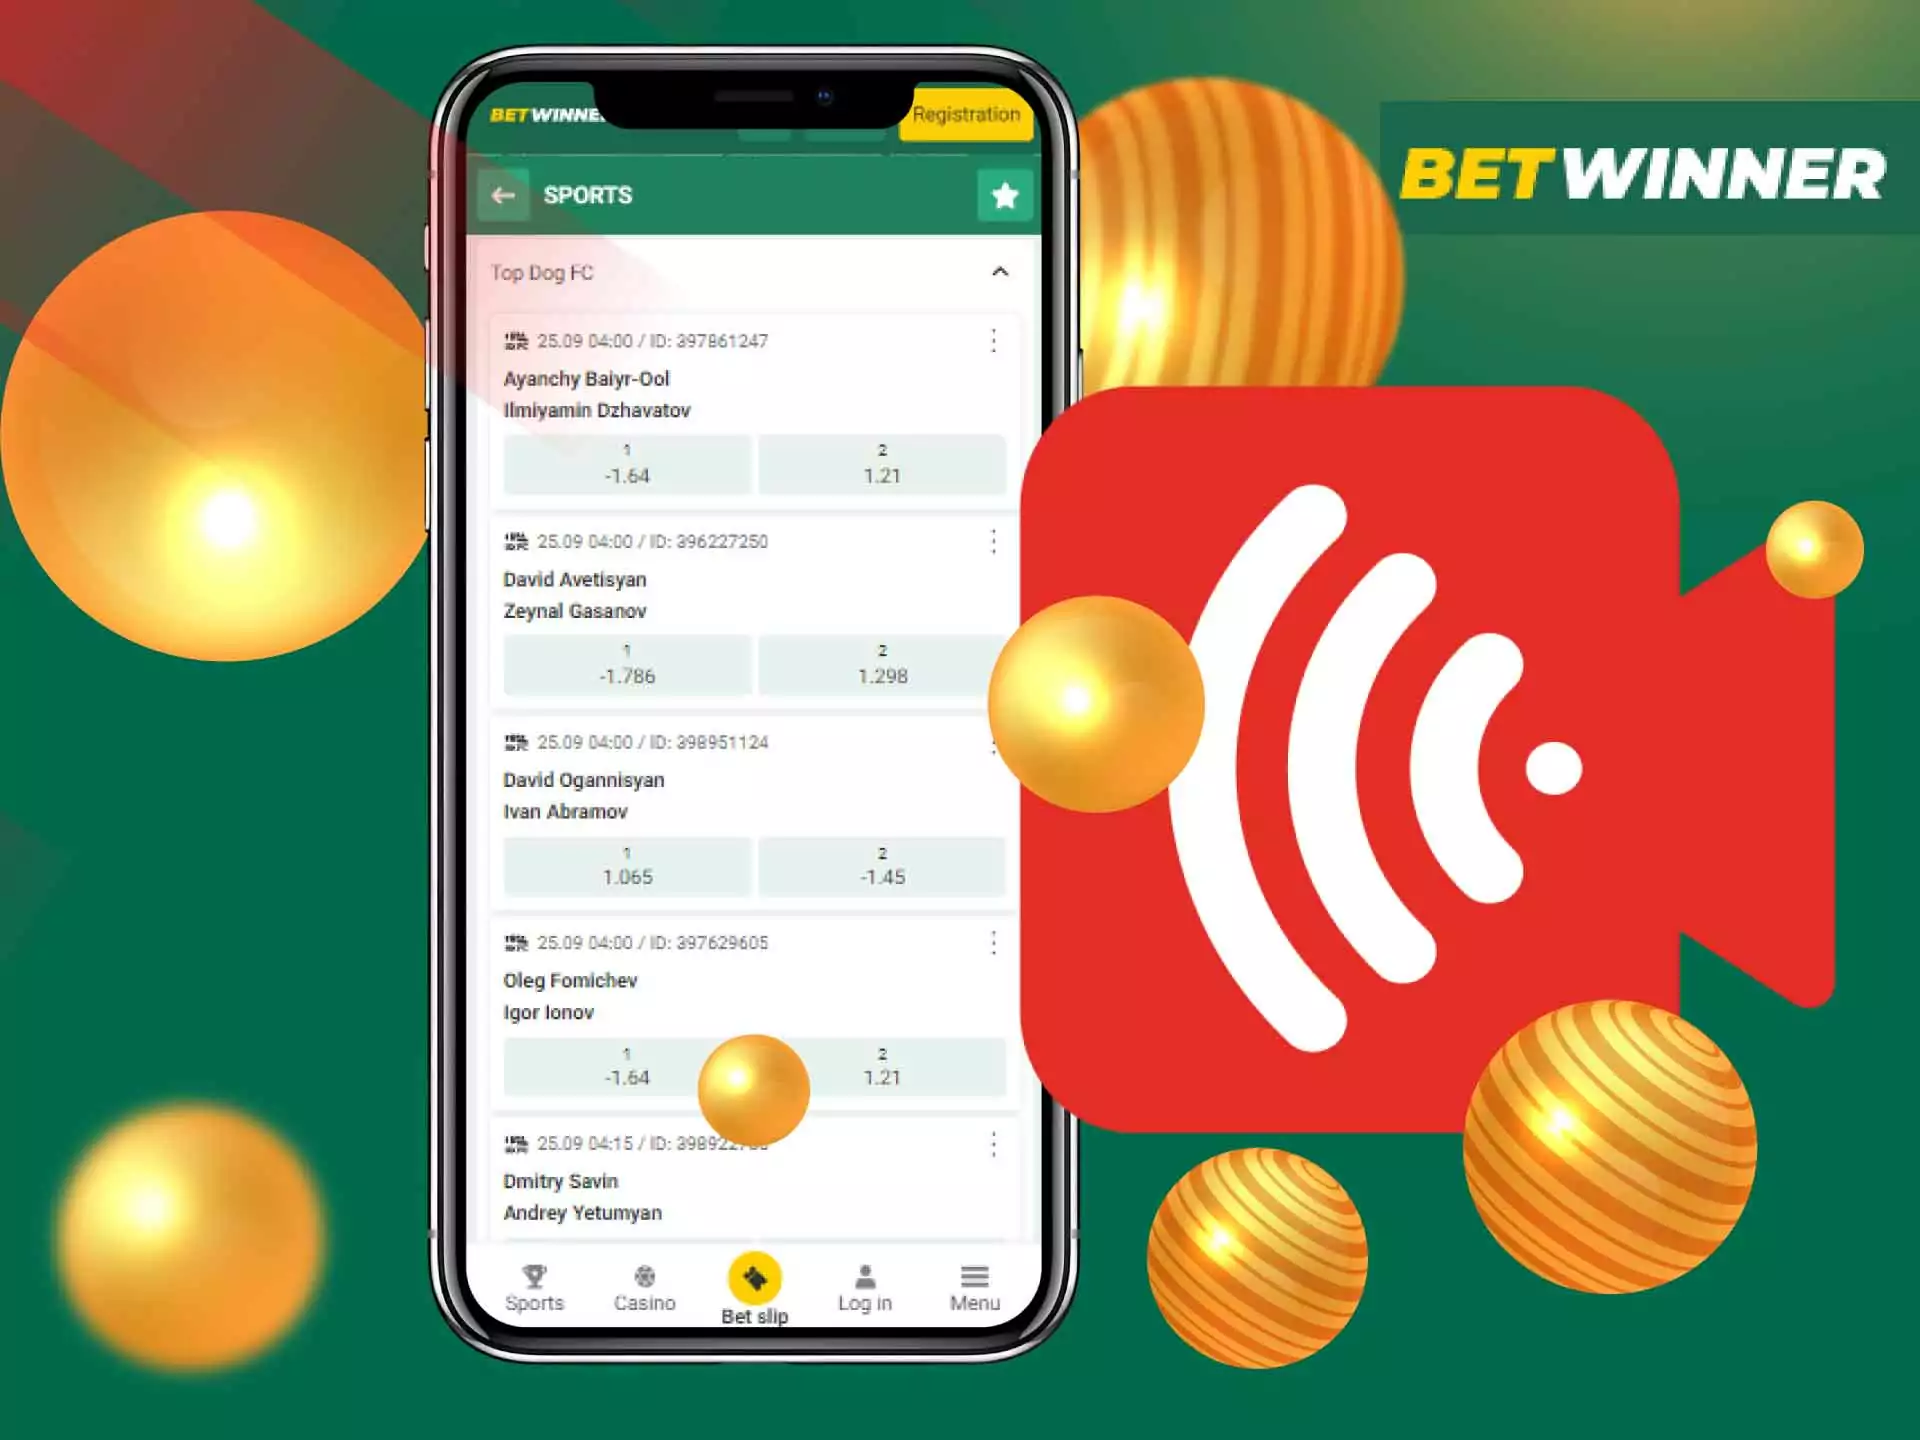 On the Betwinner site you can bet during the match.